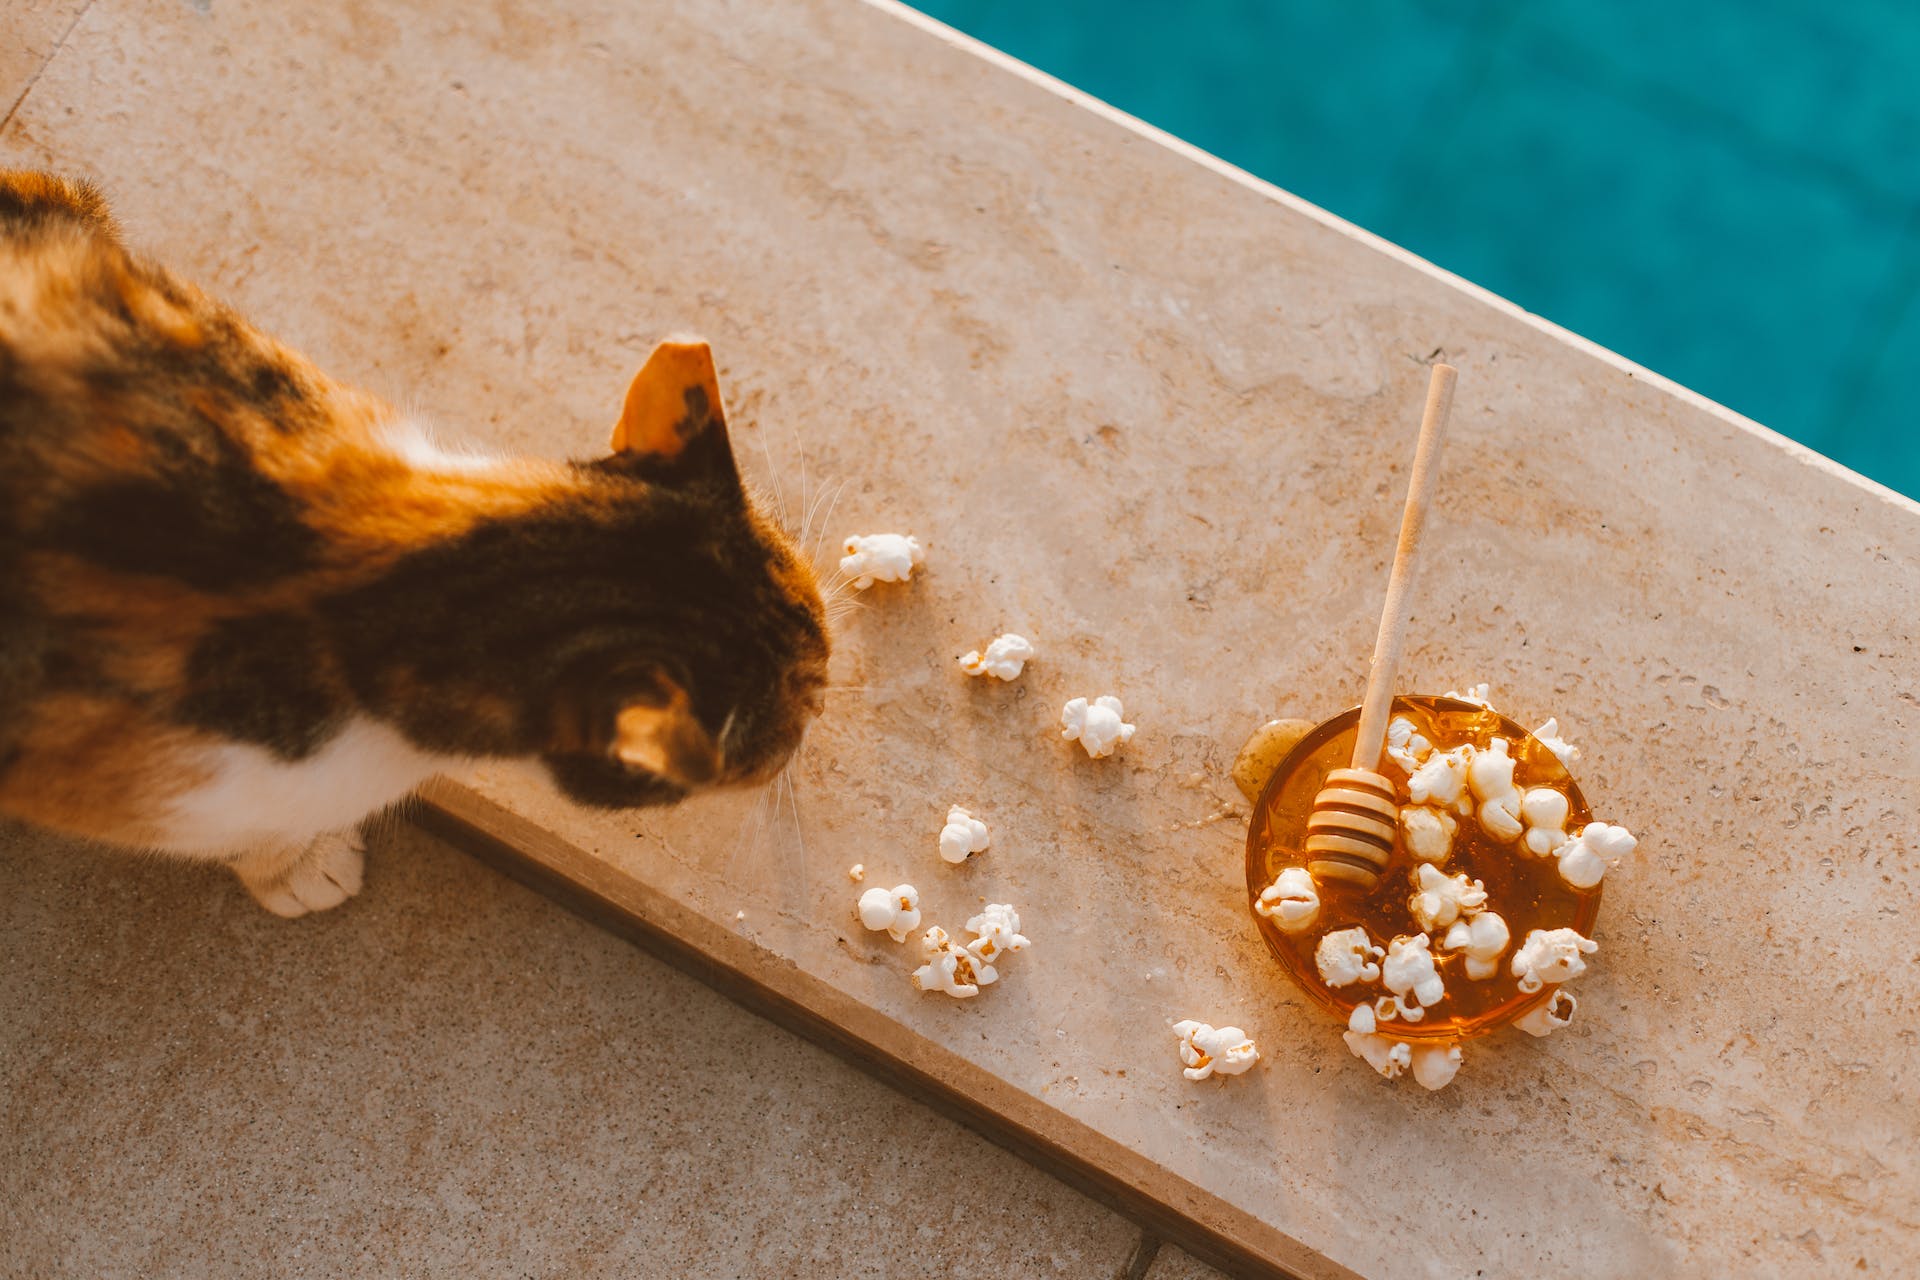 A cat sniffing a bowl full of popcorn and honey